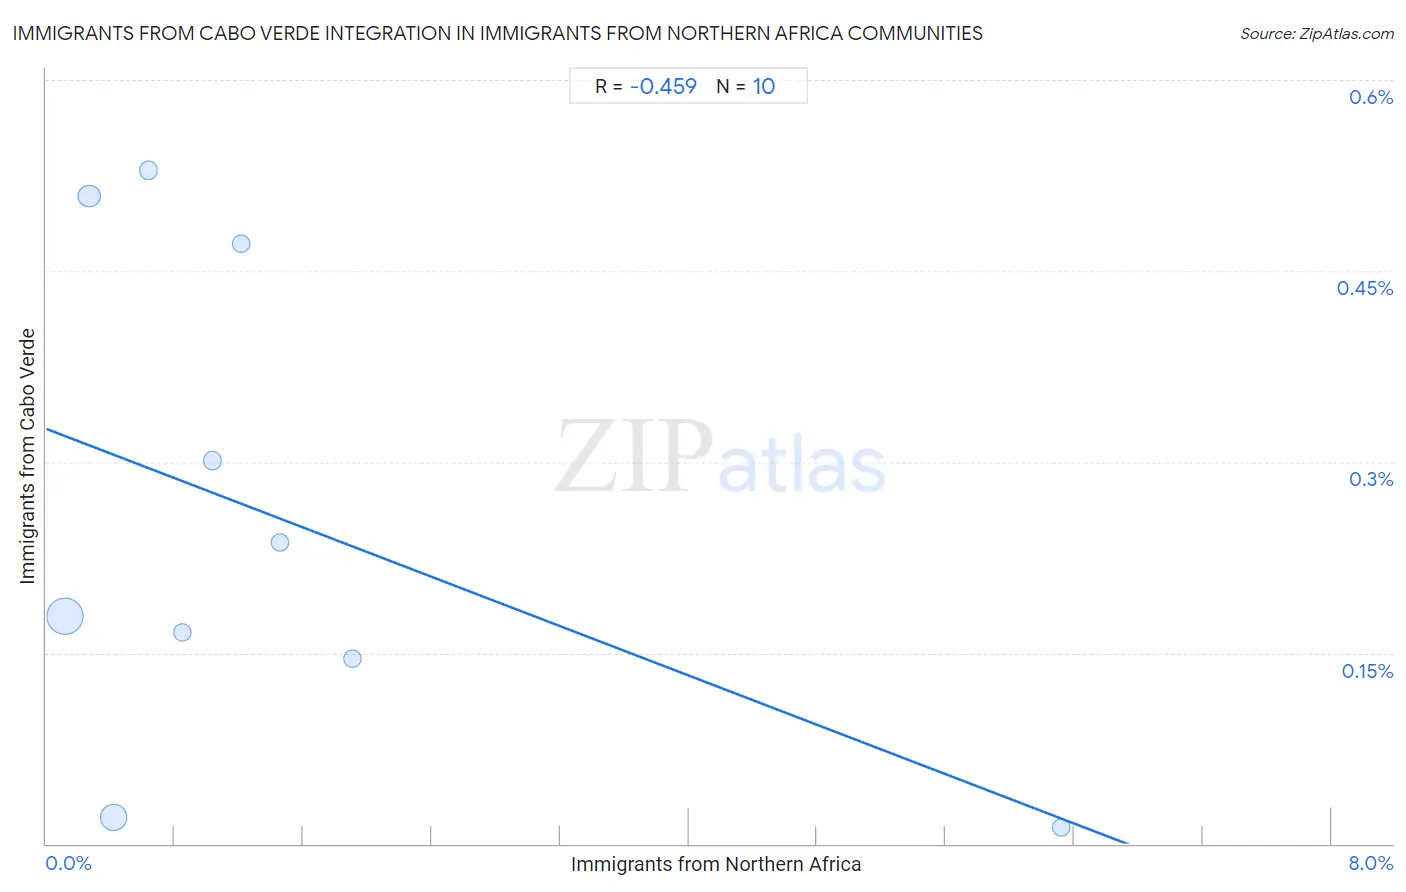 Immigrants from Northern Africa Integration in Immigrants from Cabo Verde Communities